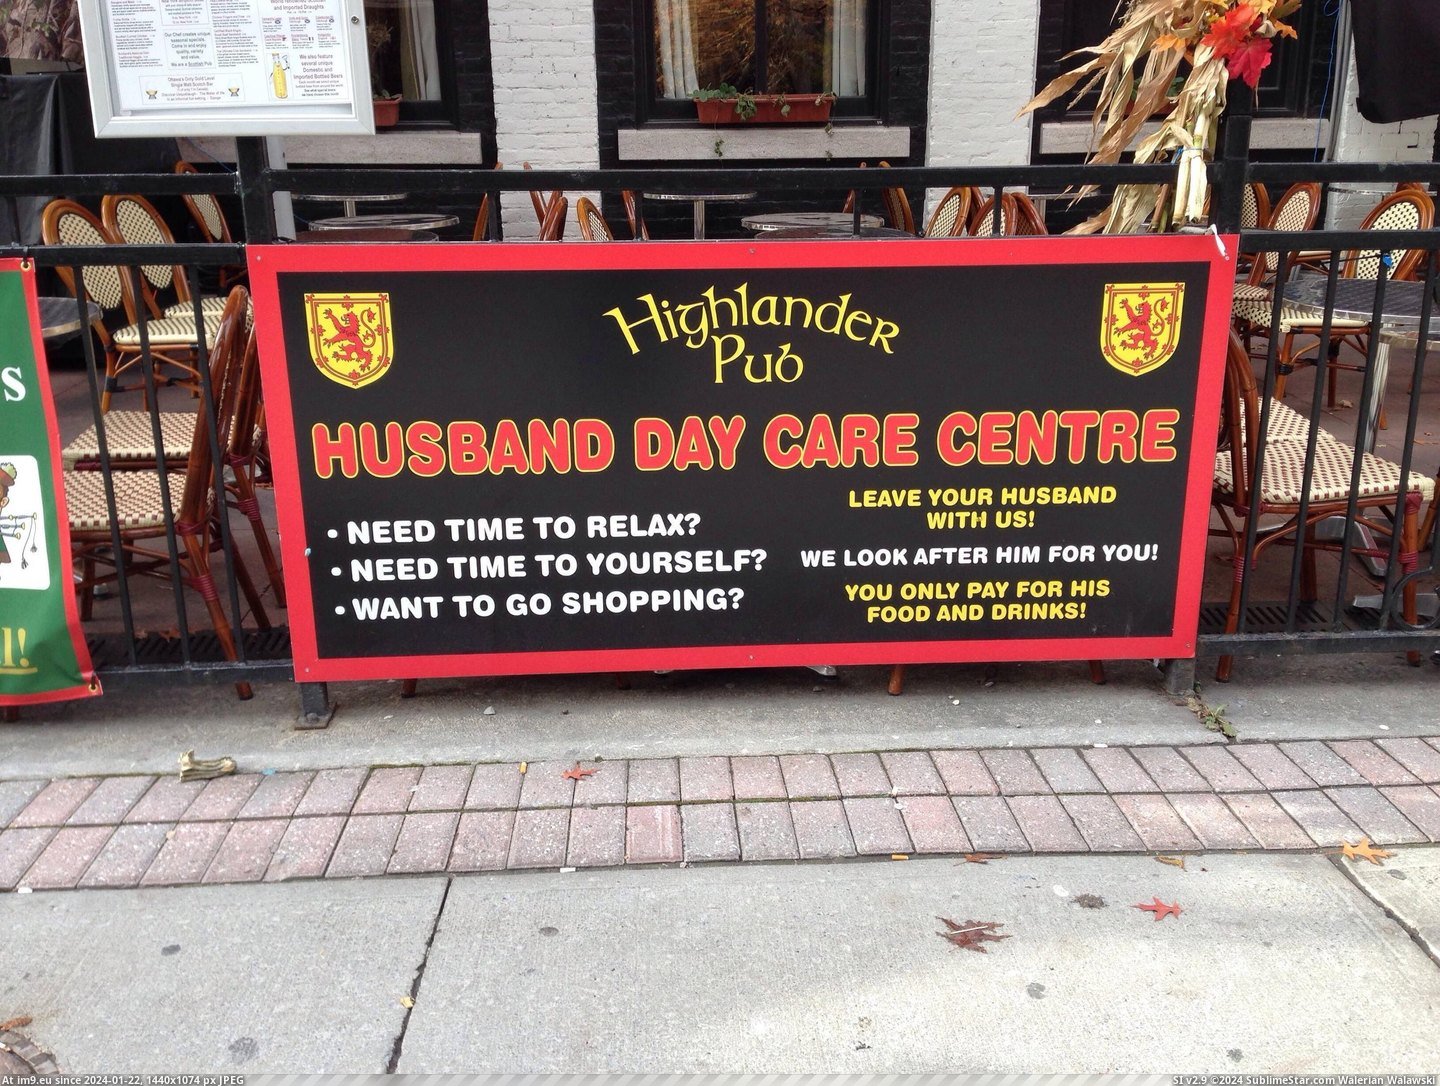 #Funny #Day #Centre #Husband #Care [Funny] Husband day care centre Pic. (Изображение из альбом My r/FUNNY favs))